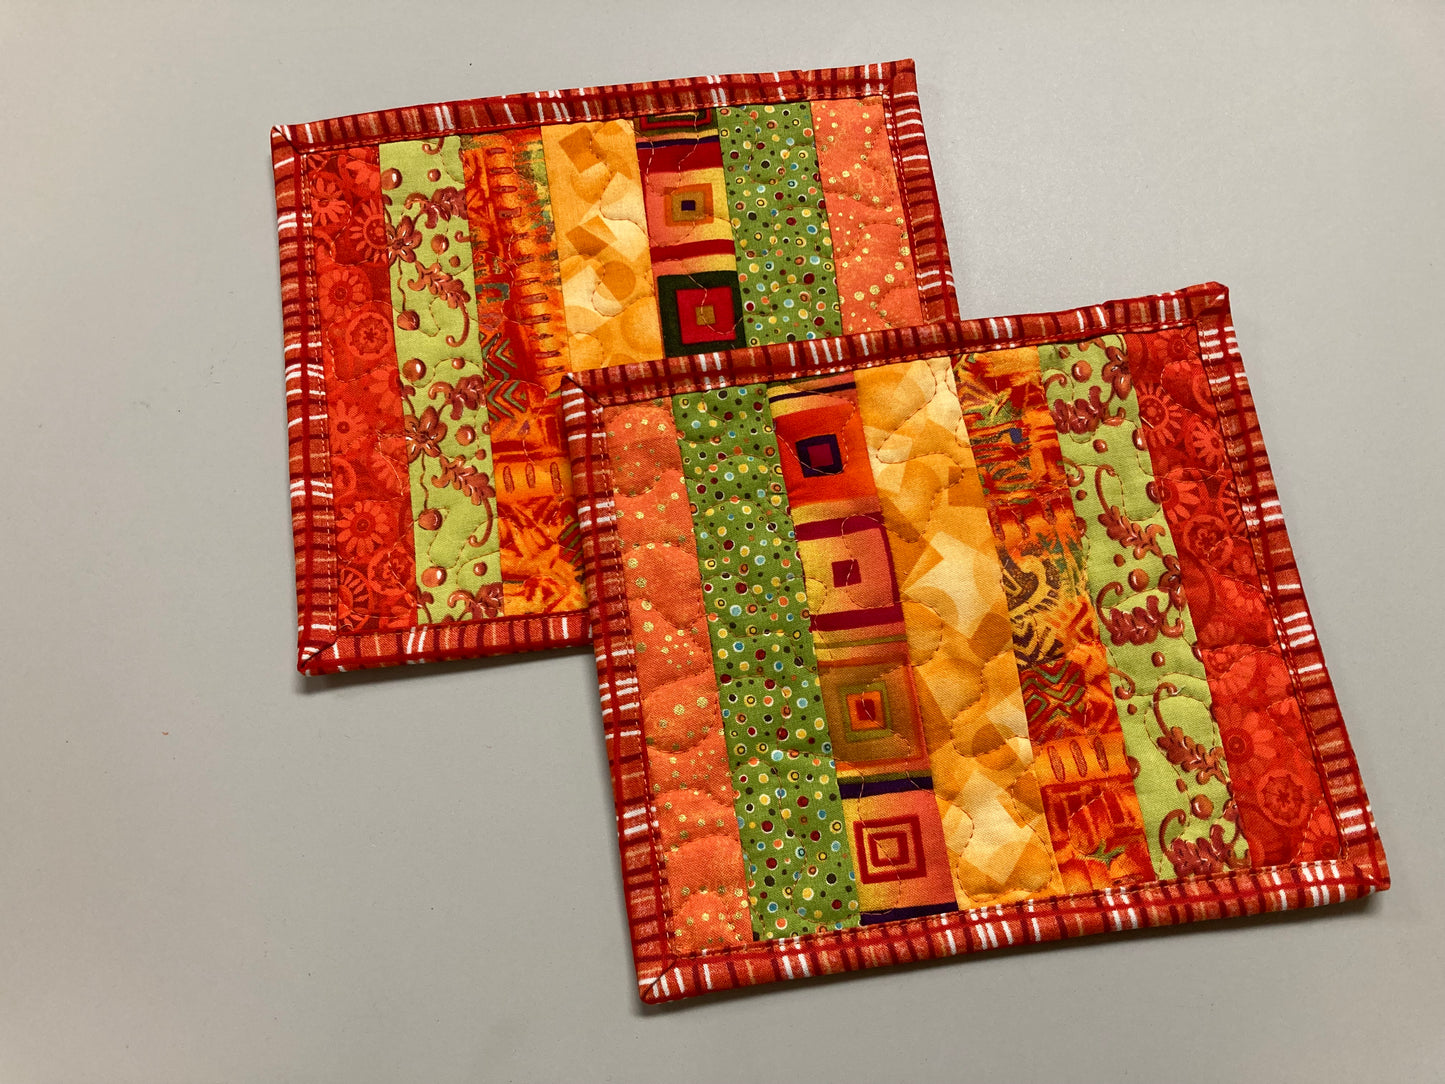 Summer Bright Mug Rugs Snack Mats, 7x8.5" Coffee End Table, Large Fabric Coasters, Hot Cold Drink Trivets, Handmade Boho Red/Green/Orange